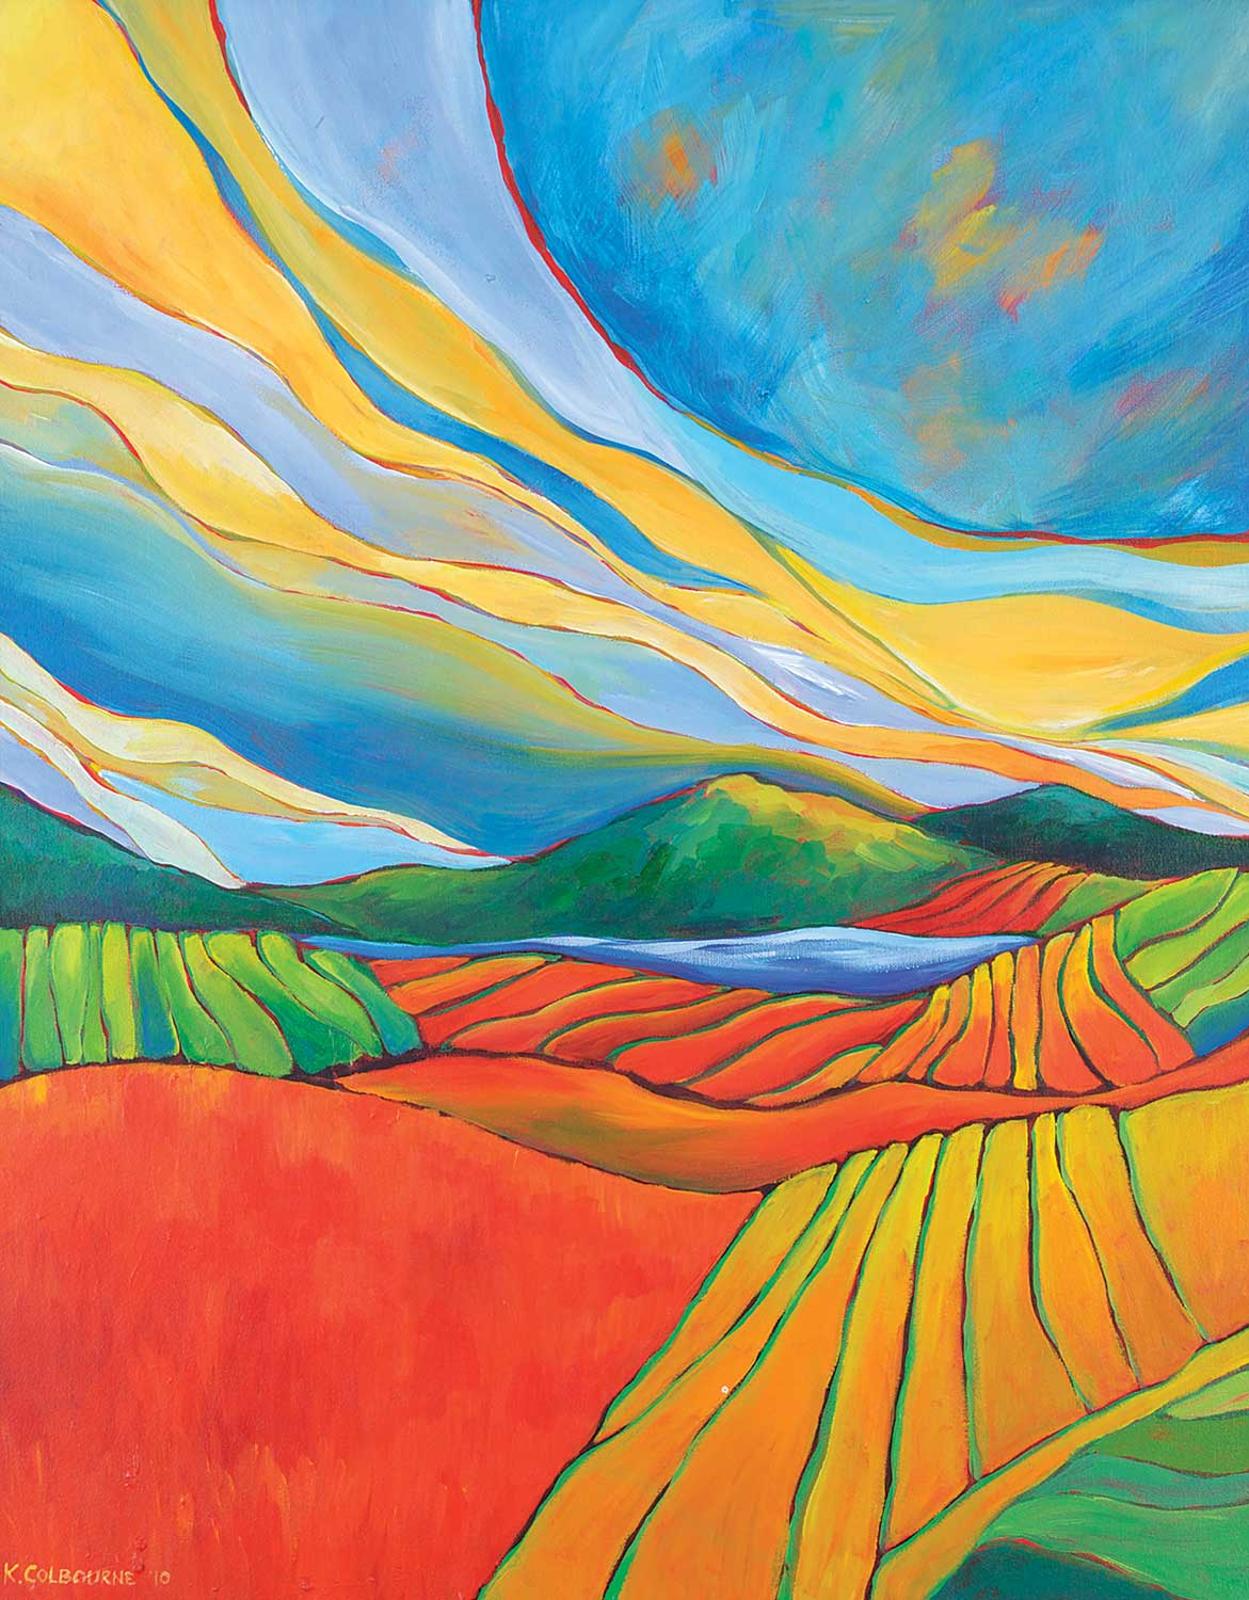 K. Colbourne - Untitled - Vibrant Fields